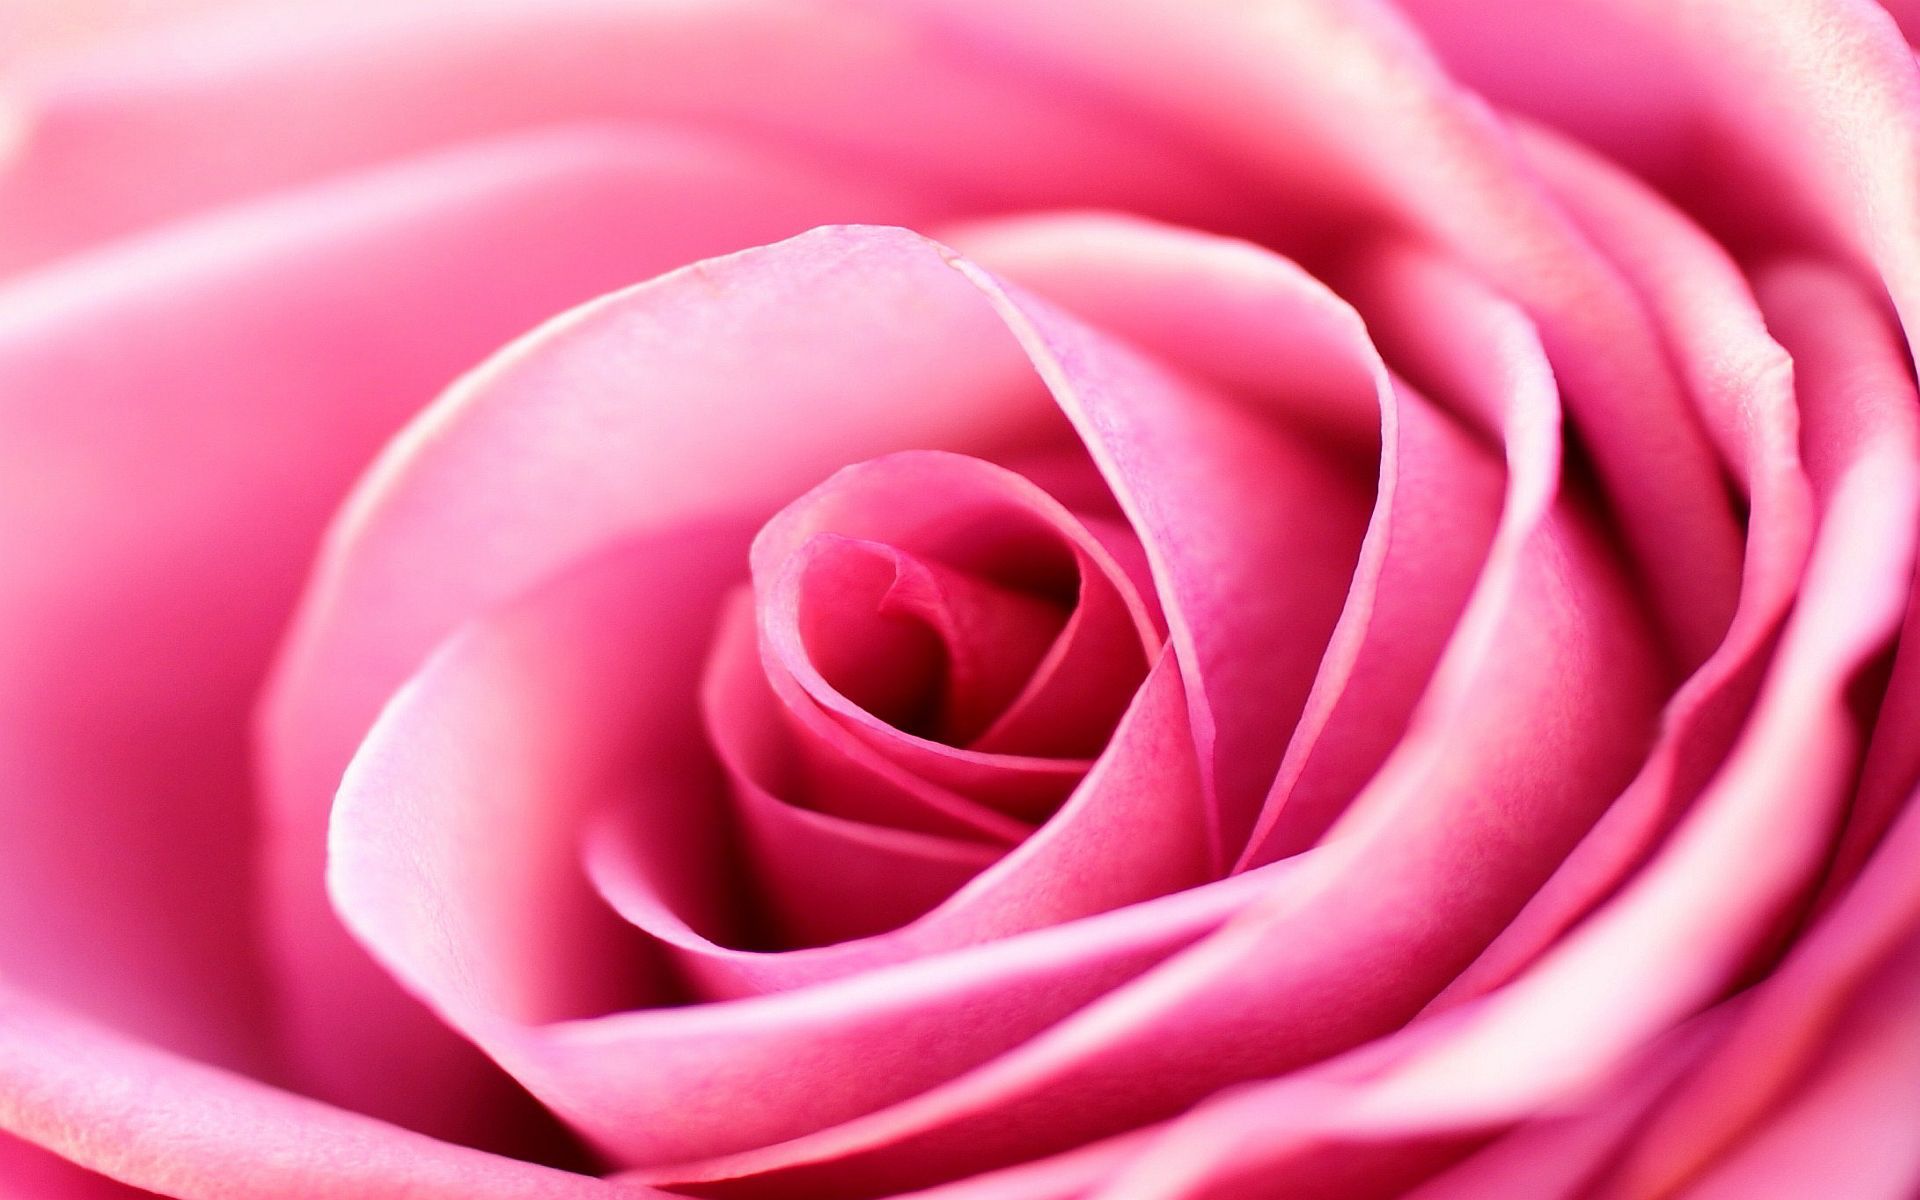 Pink Rose Background 5925 1920x1200 px WallpaperFort.com